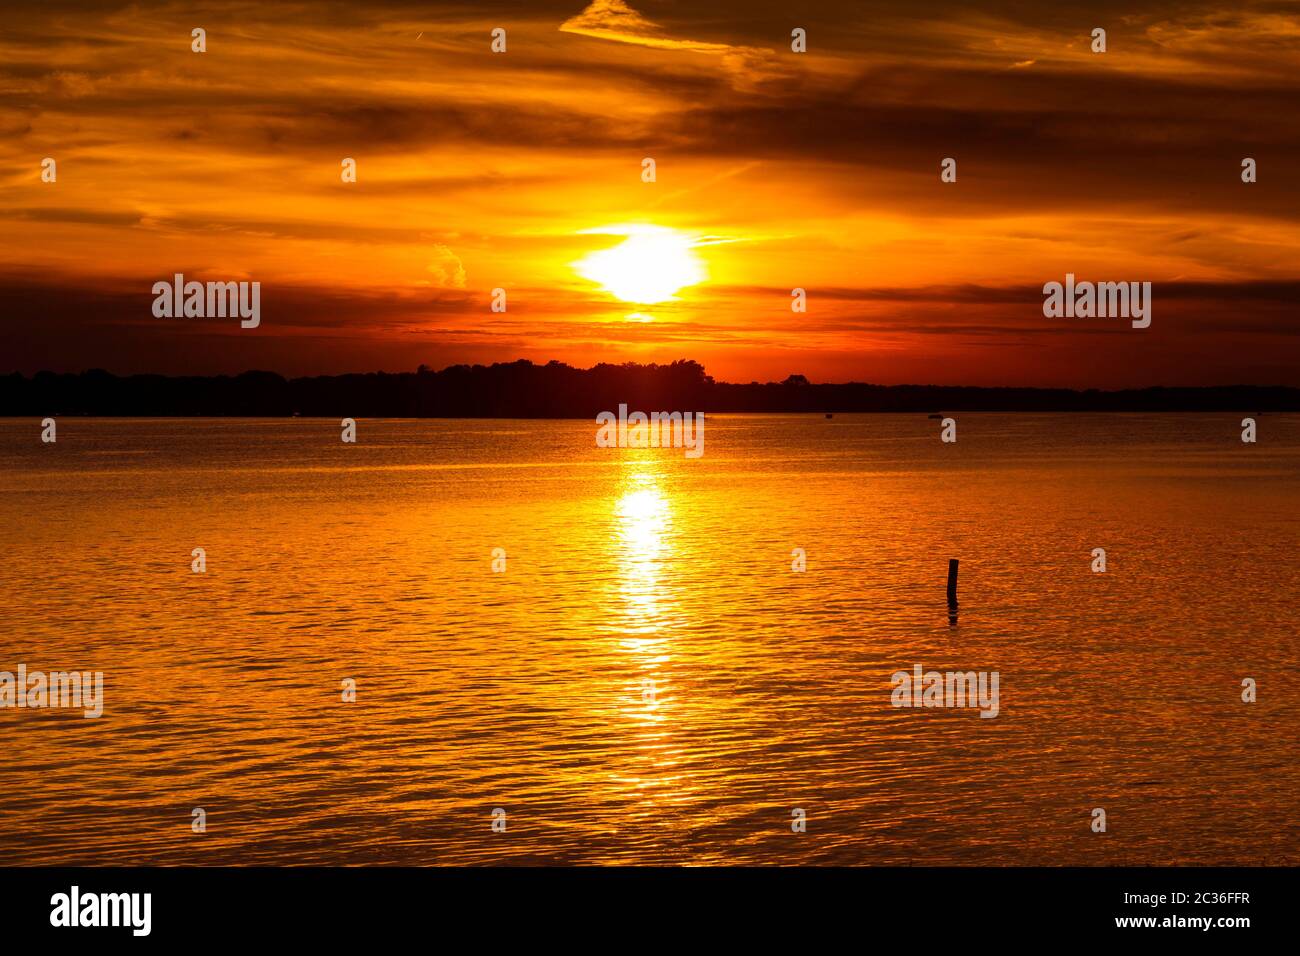 Sunset Over a Lake Stock Photo